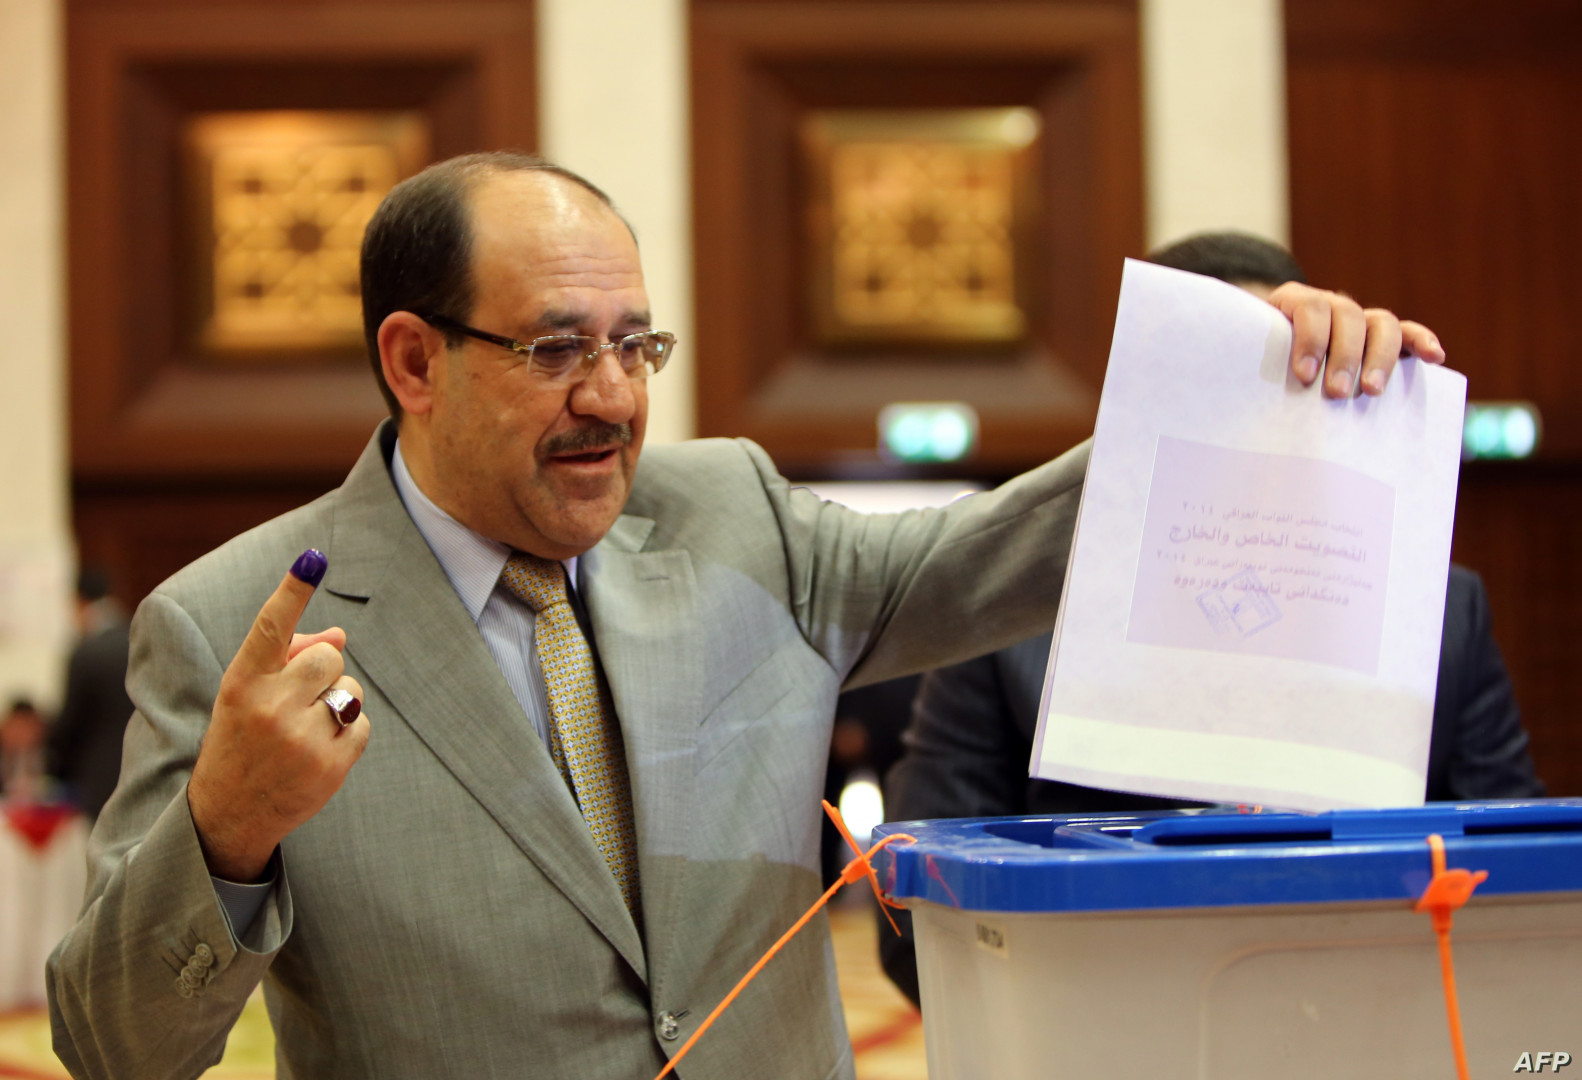 Al-Maliki calls political forces to cooperate to strengthen national unity, security, and stability